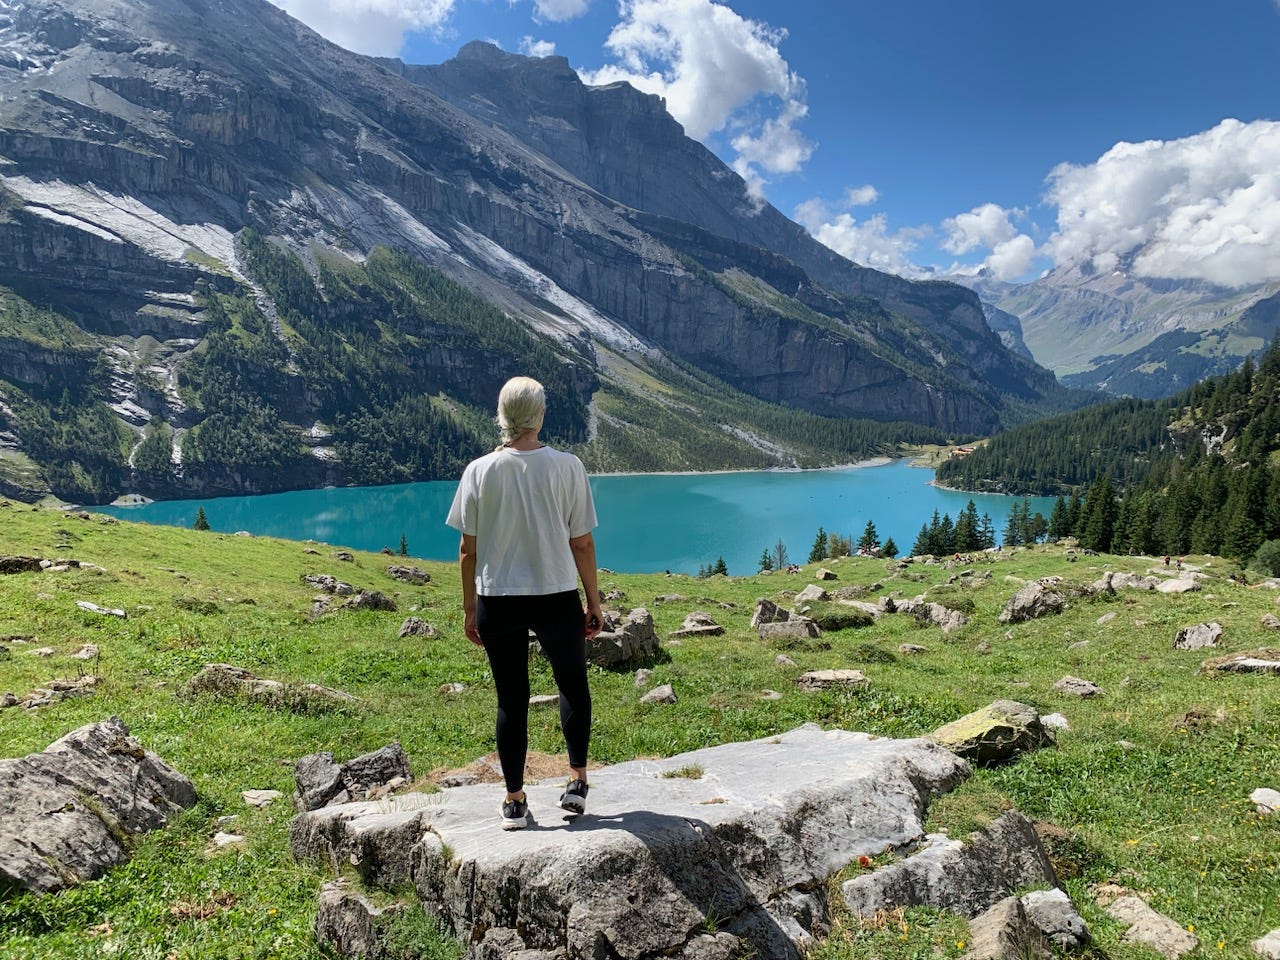 A blonde woman in a white T-shirt and black leggings stands with her back to the camera looking out on a picturesque view of mountains rising over an aqua blue lake.